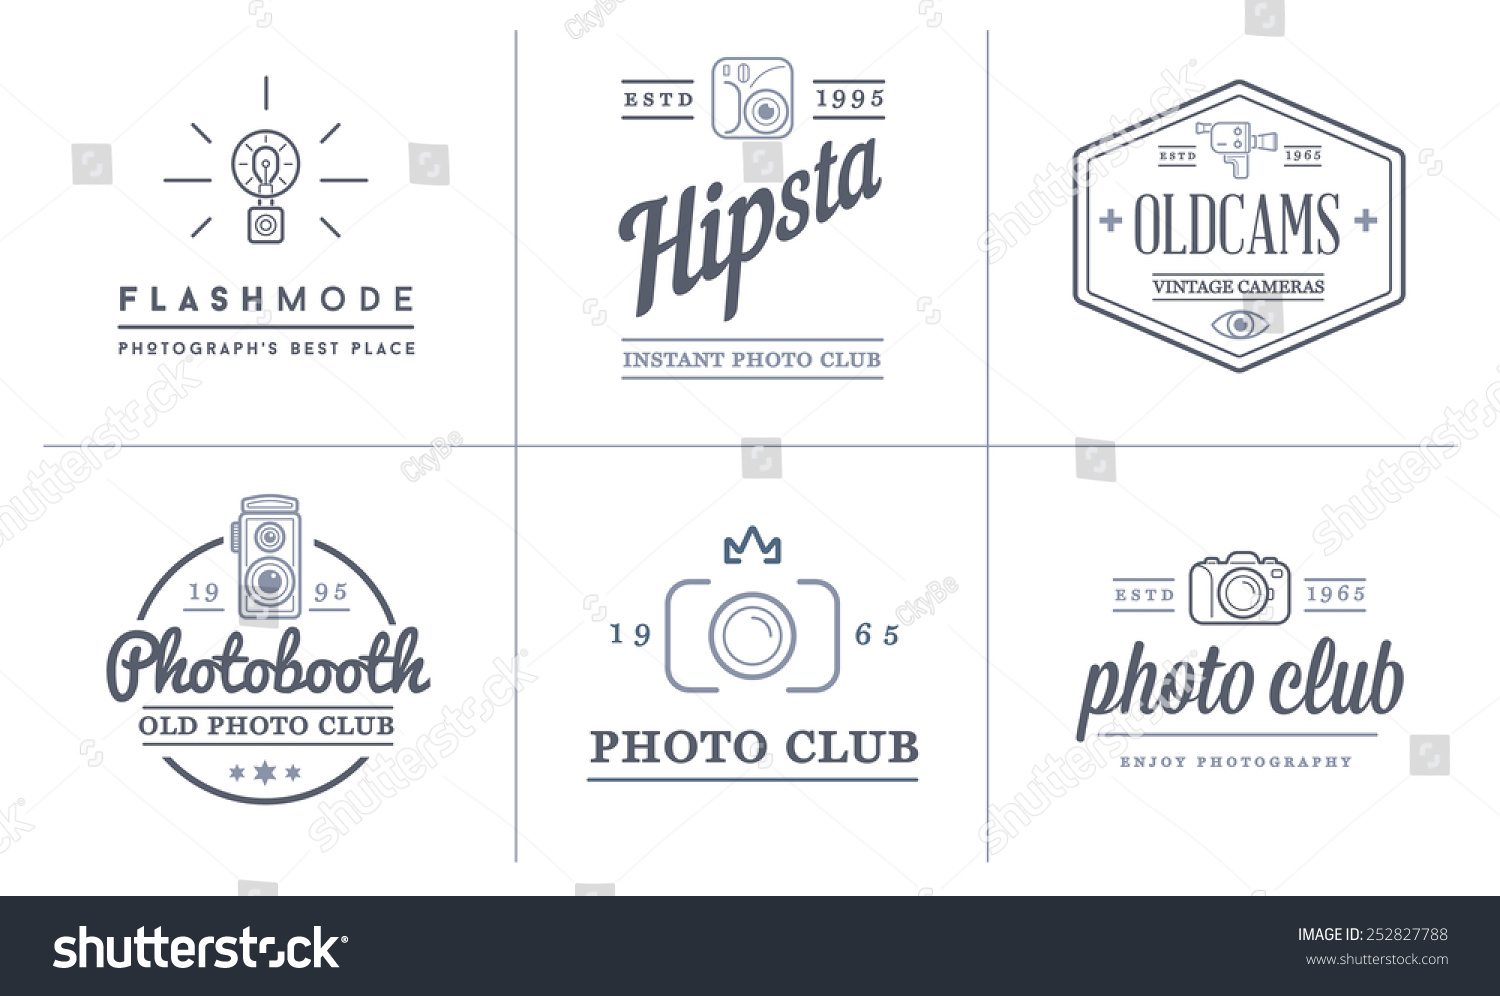 17,795 Old camera logo Images, Stock Photos & Vectors | Shutterstock